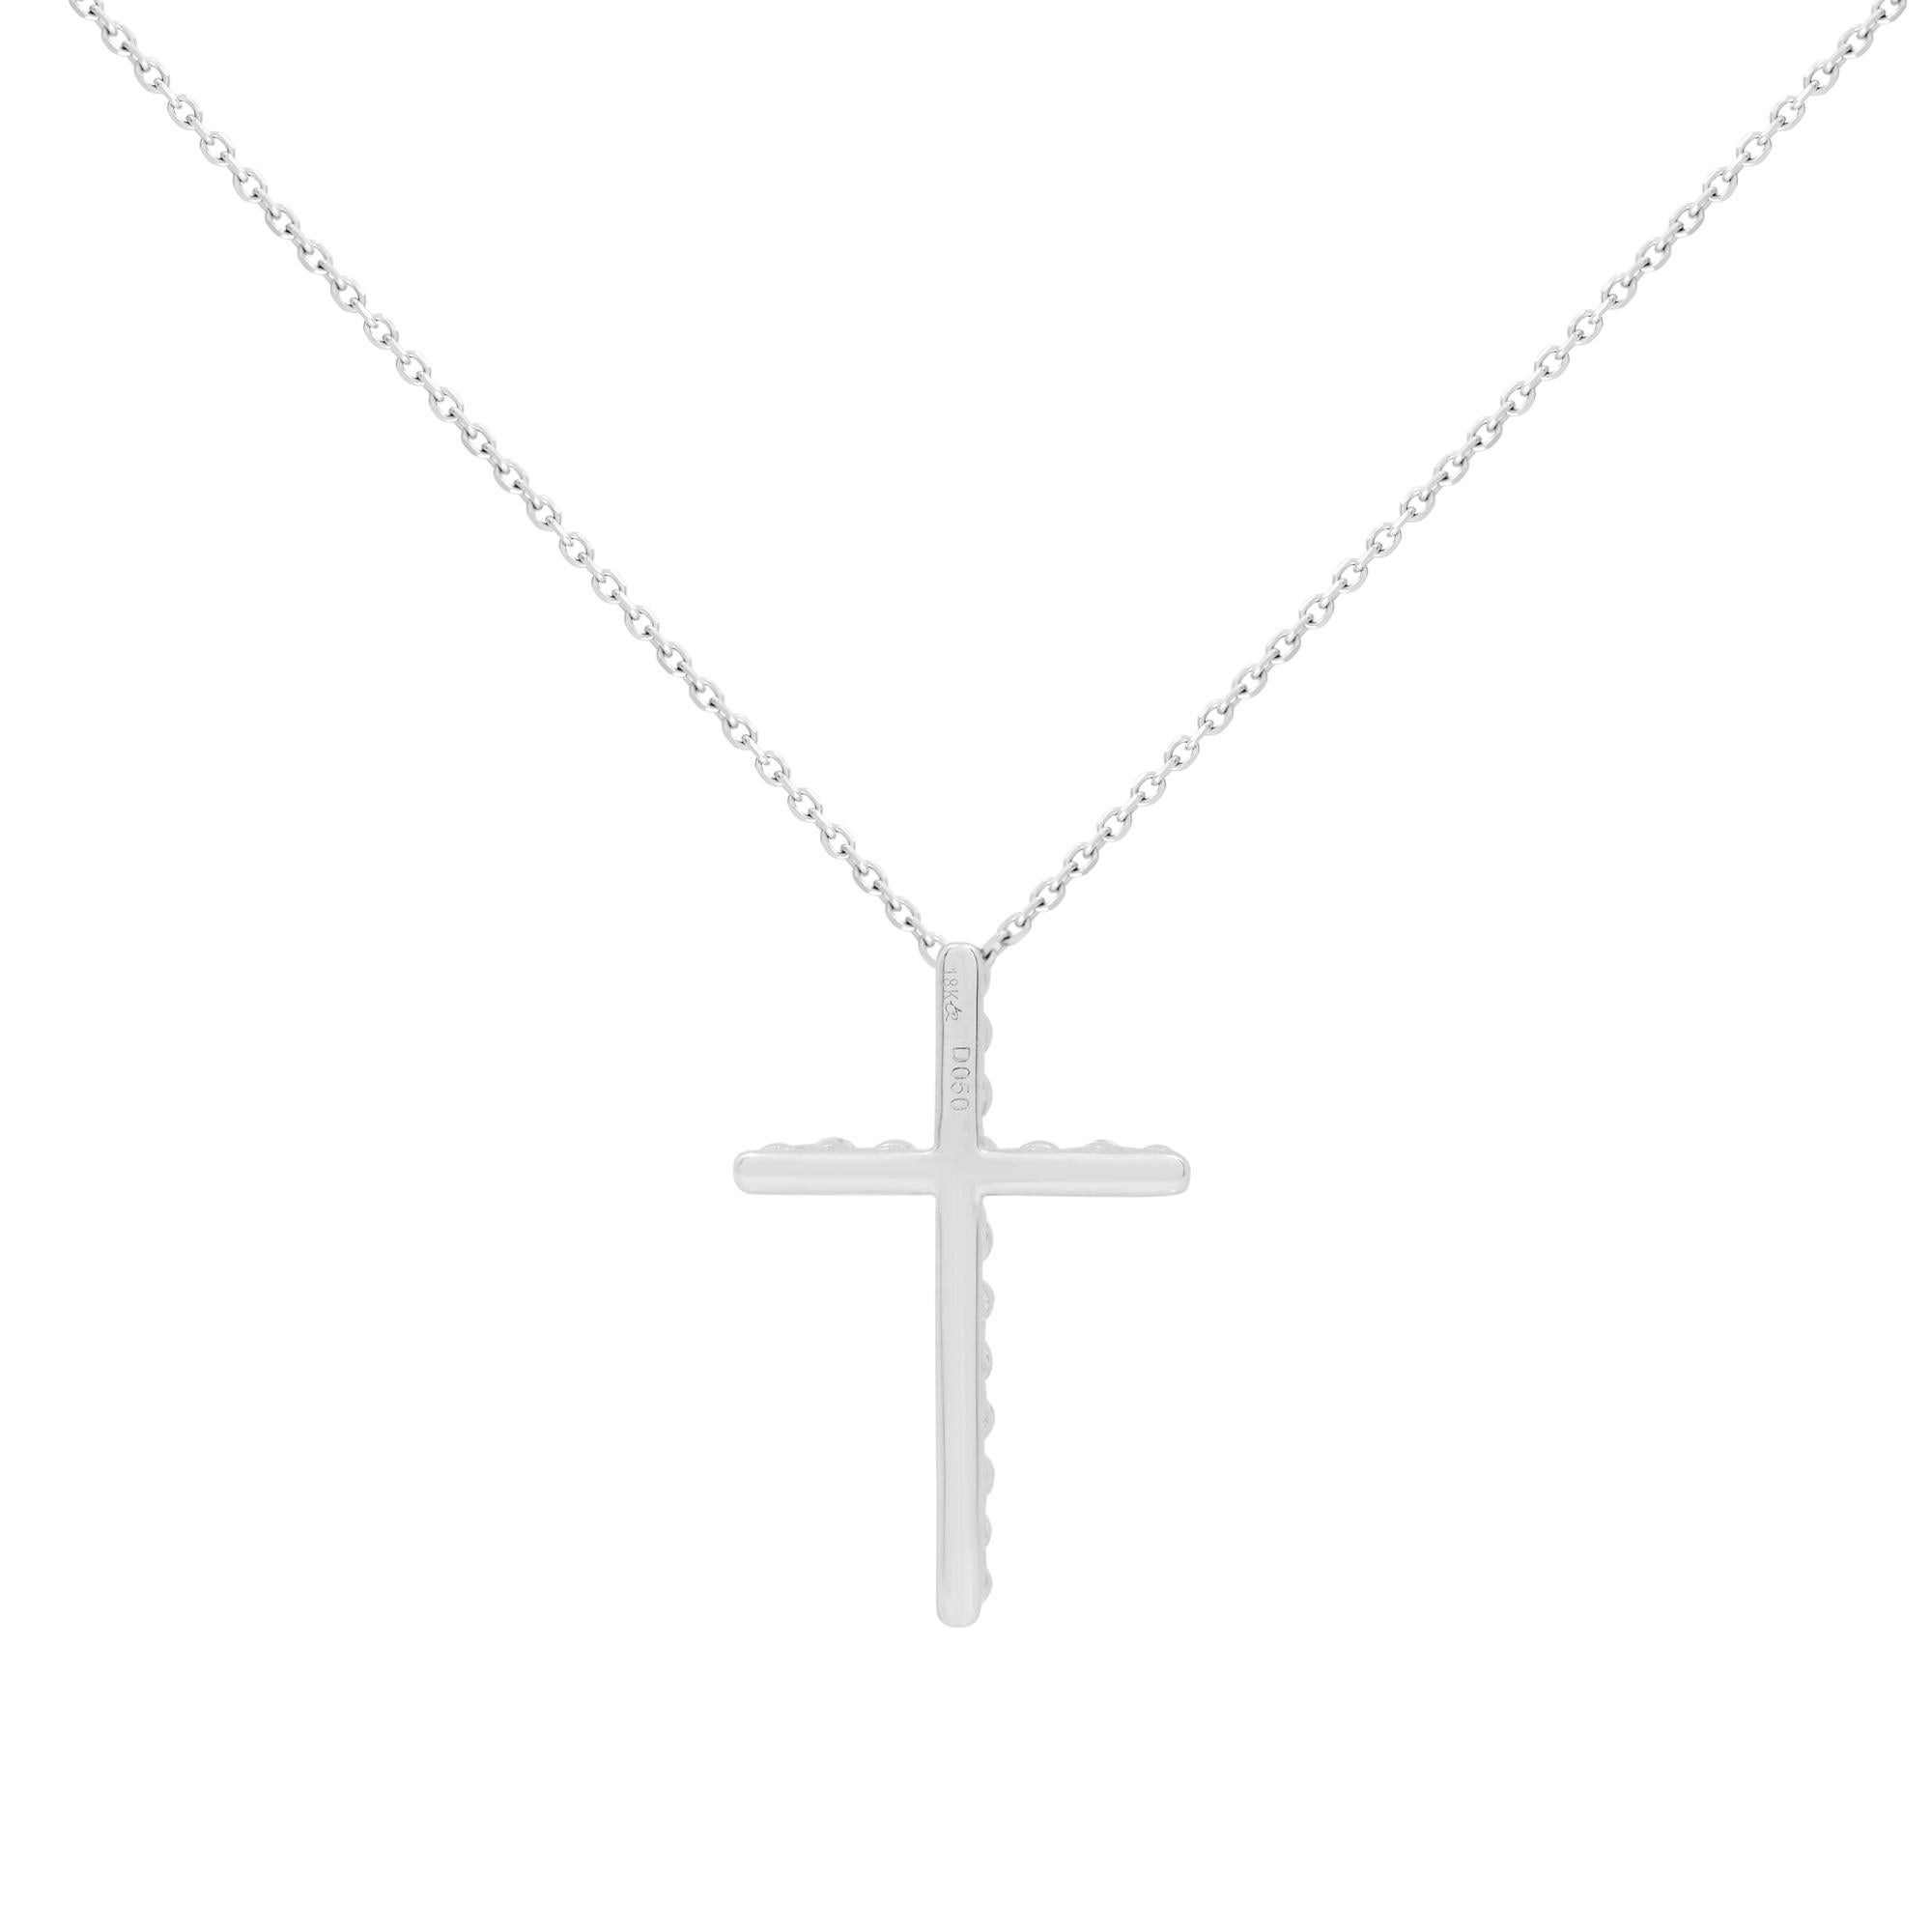 A gorgeous and modern diamond 0.50cttw cross pendant. Includes 17 brilliant round cut diamonds. The Diamonds are very sparkly and of high quality. Diamond color G-H Color and VS-SI Clarity. The diamonds are beautifully set in a unique single prong